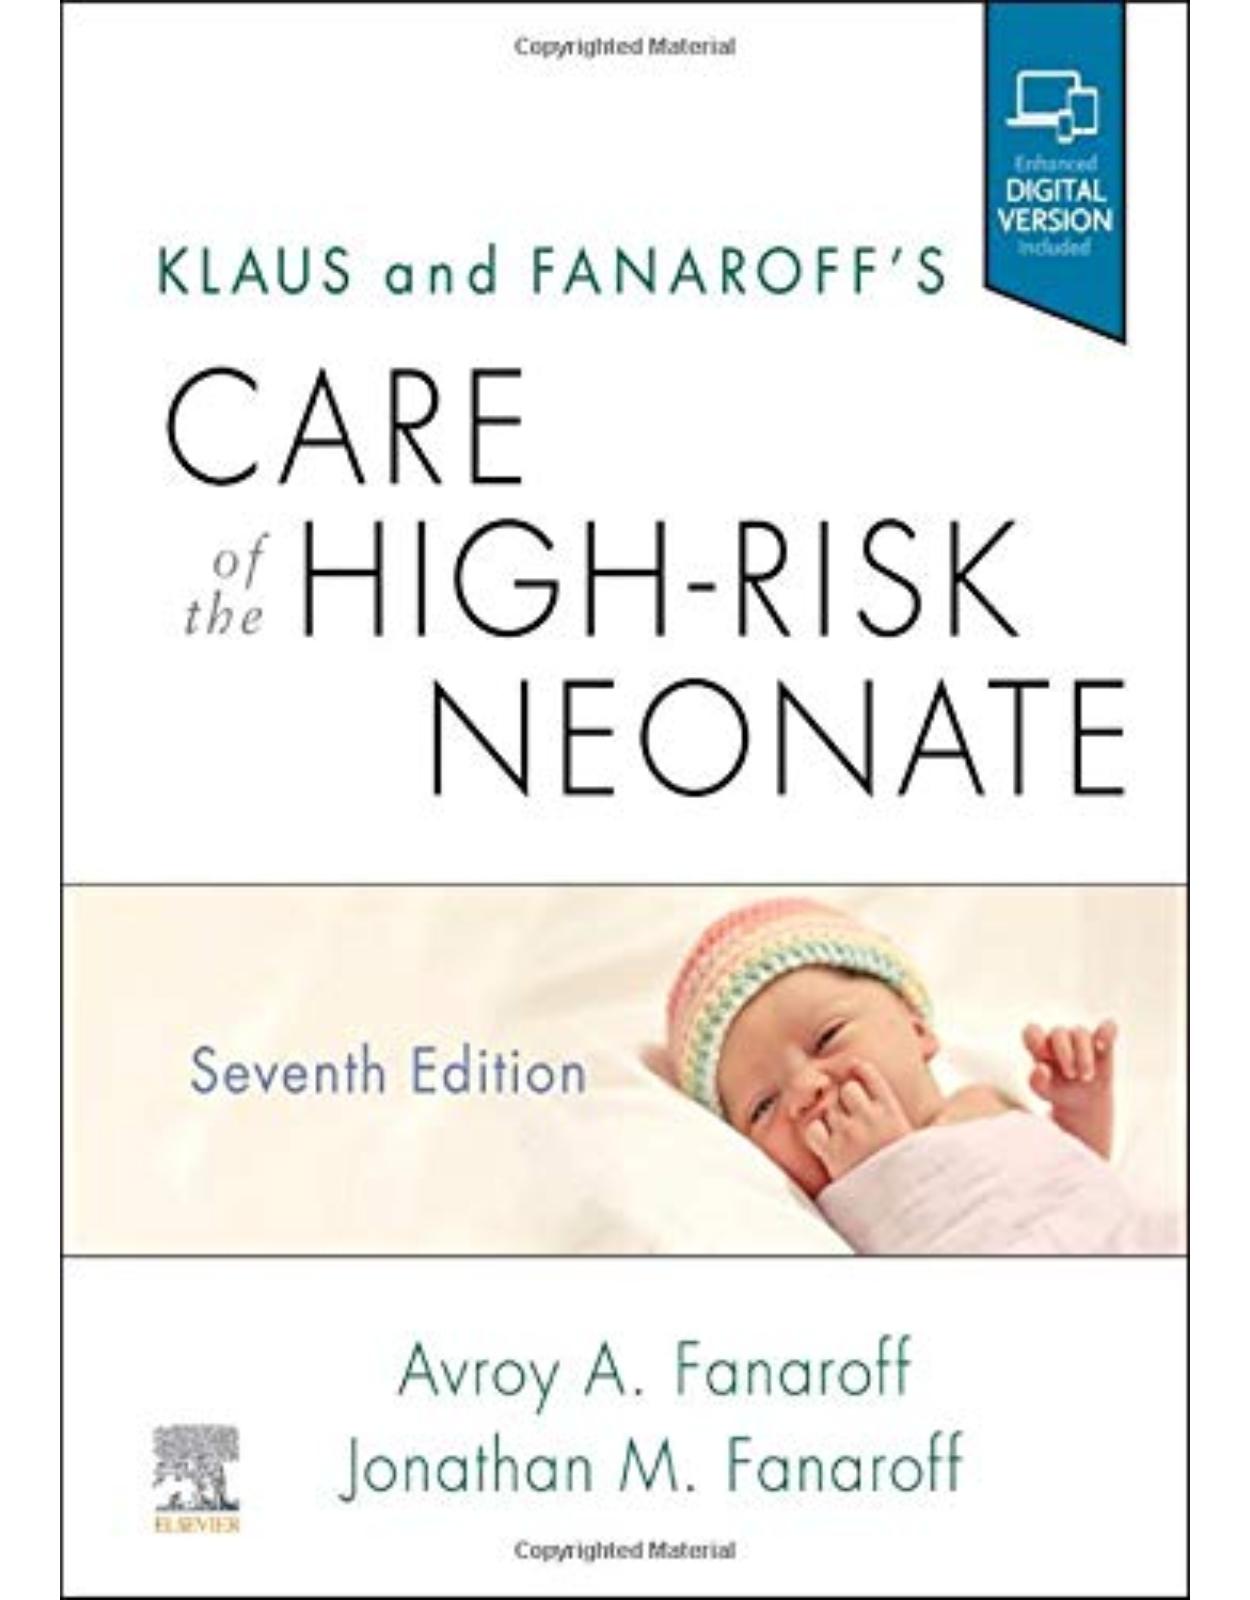 Klaus and Fanaroff's Care of the High-Risk Neonate, 7th Edition 